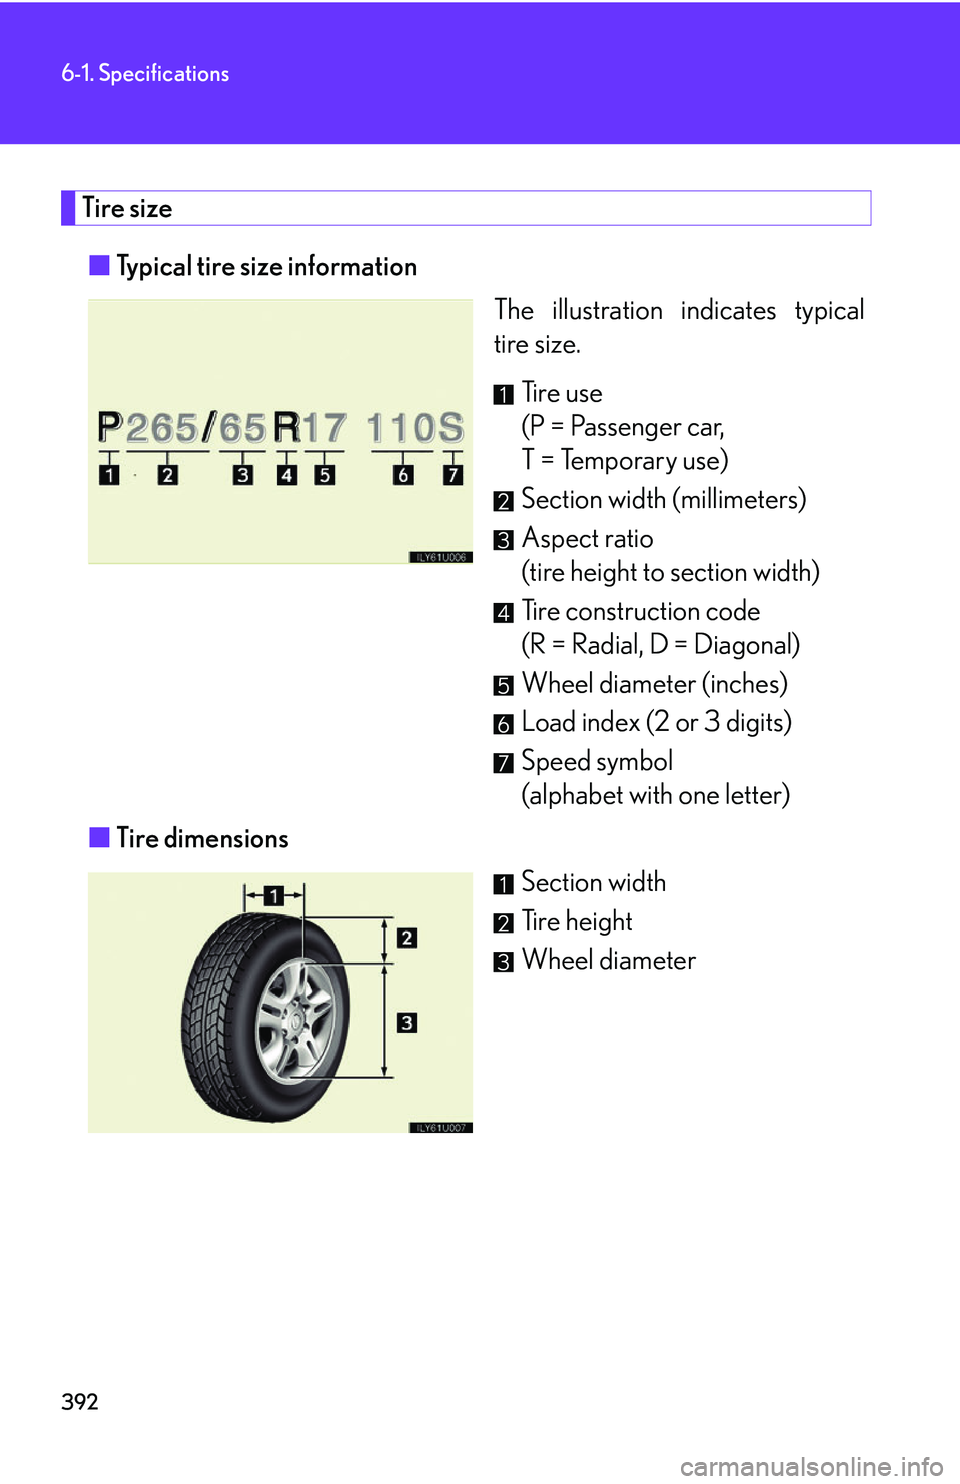 Lexus GX470 2007  Air Conditioning / LEXUS 2007 GX470 OWNERS MANUAL (OM60C64U) 392
6-1. Specifications
Tire size■ Typical tire size information
The illustration indicates typical
tire size.
Ti r e  u s e
(P = Passenger car, 
T = Temporary use)
Section width (millimeters)
Aspec